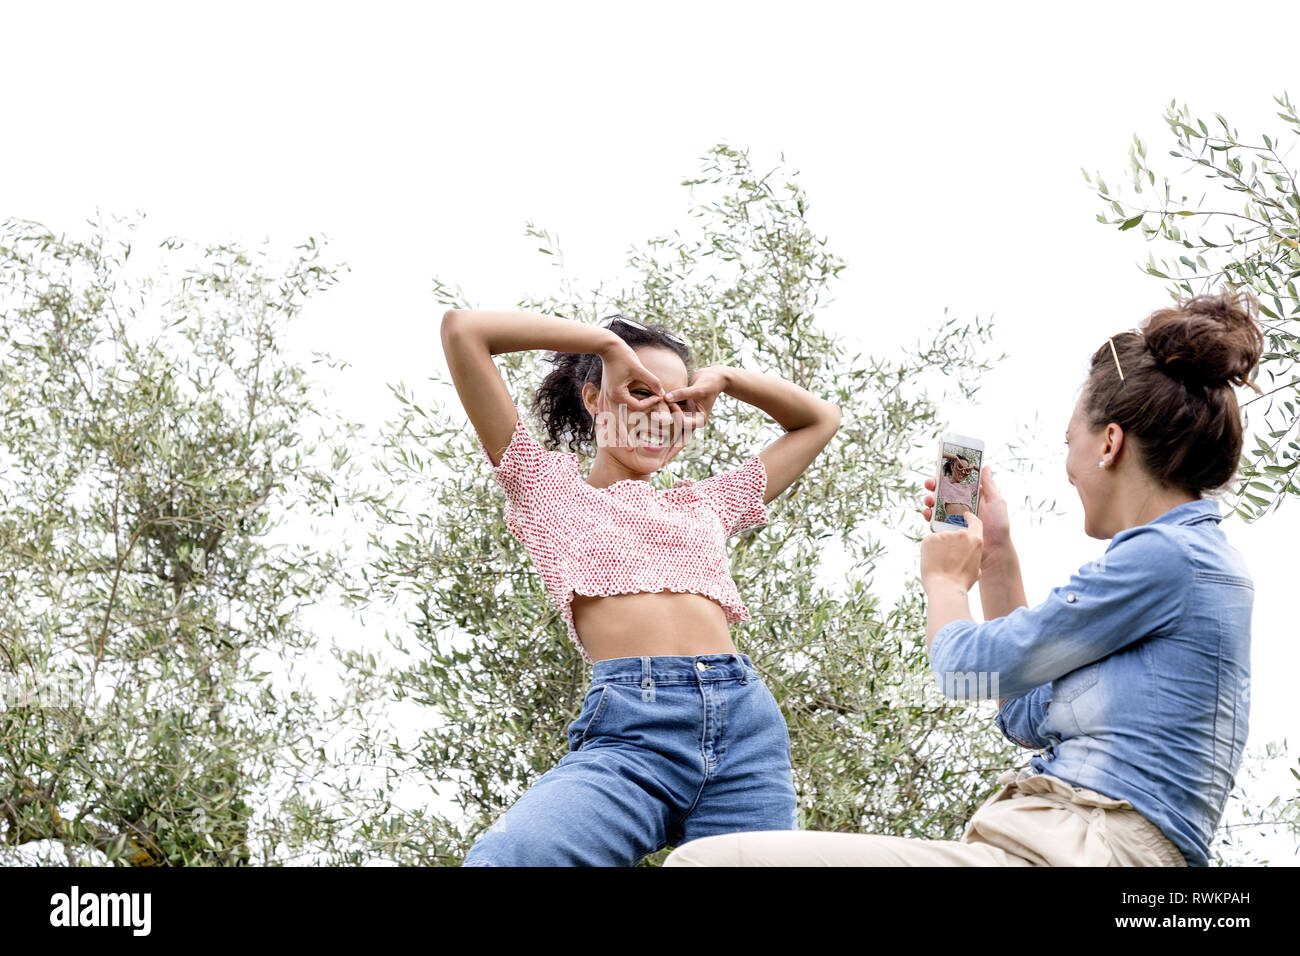 Woman taking photo of friend making faces Stock Photo